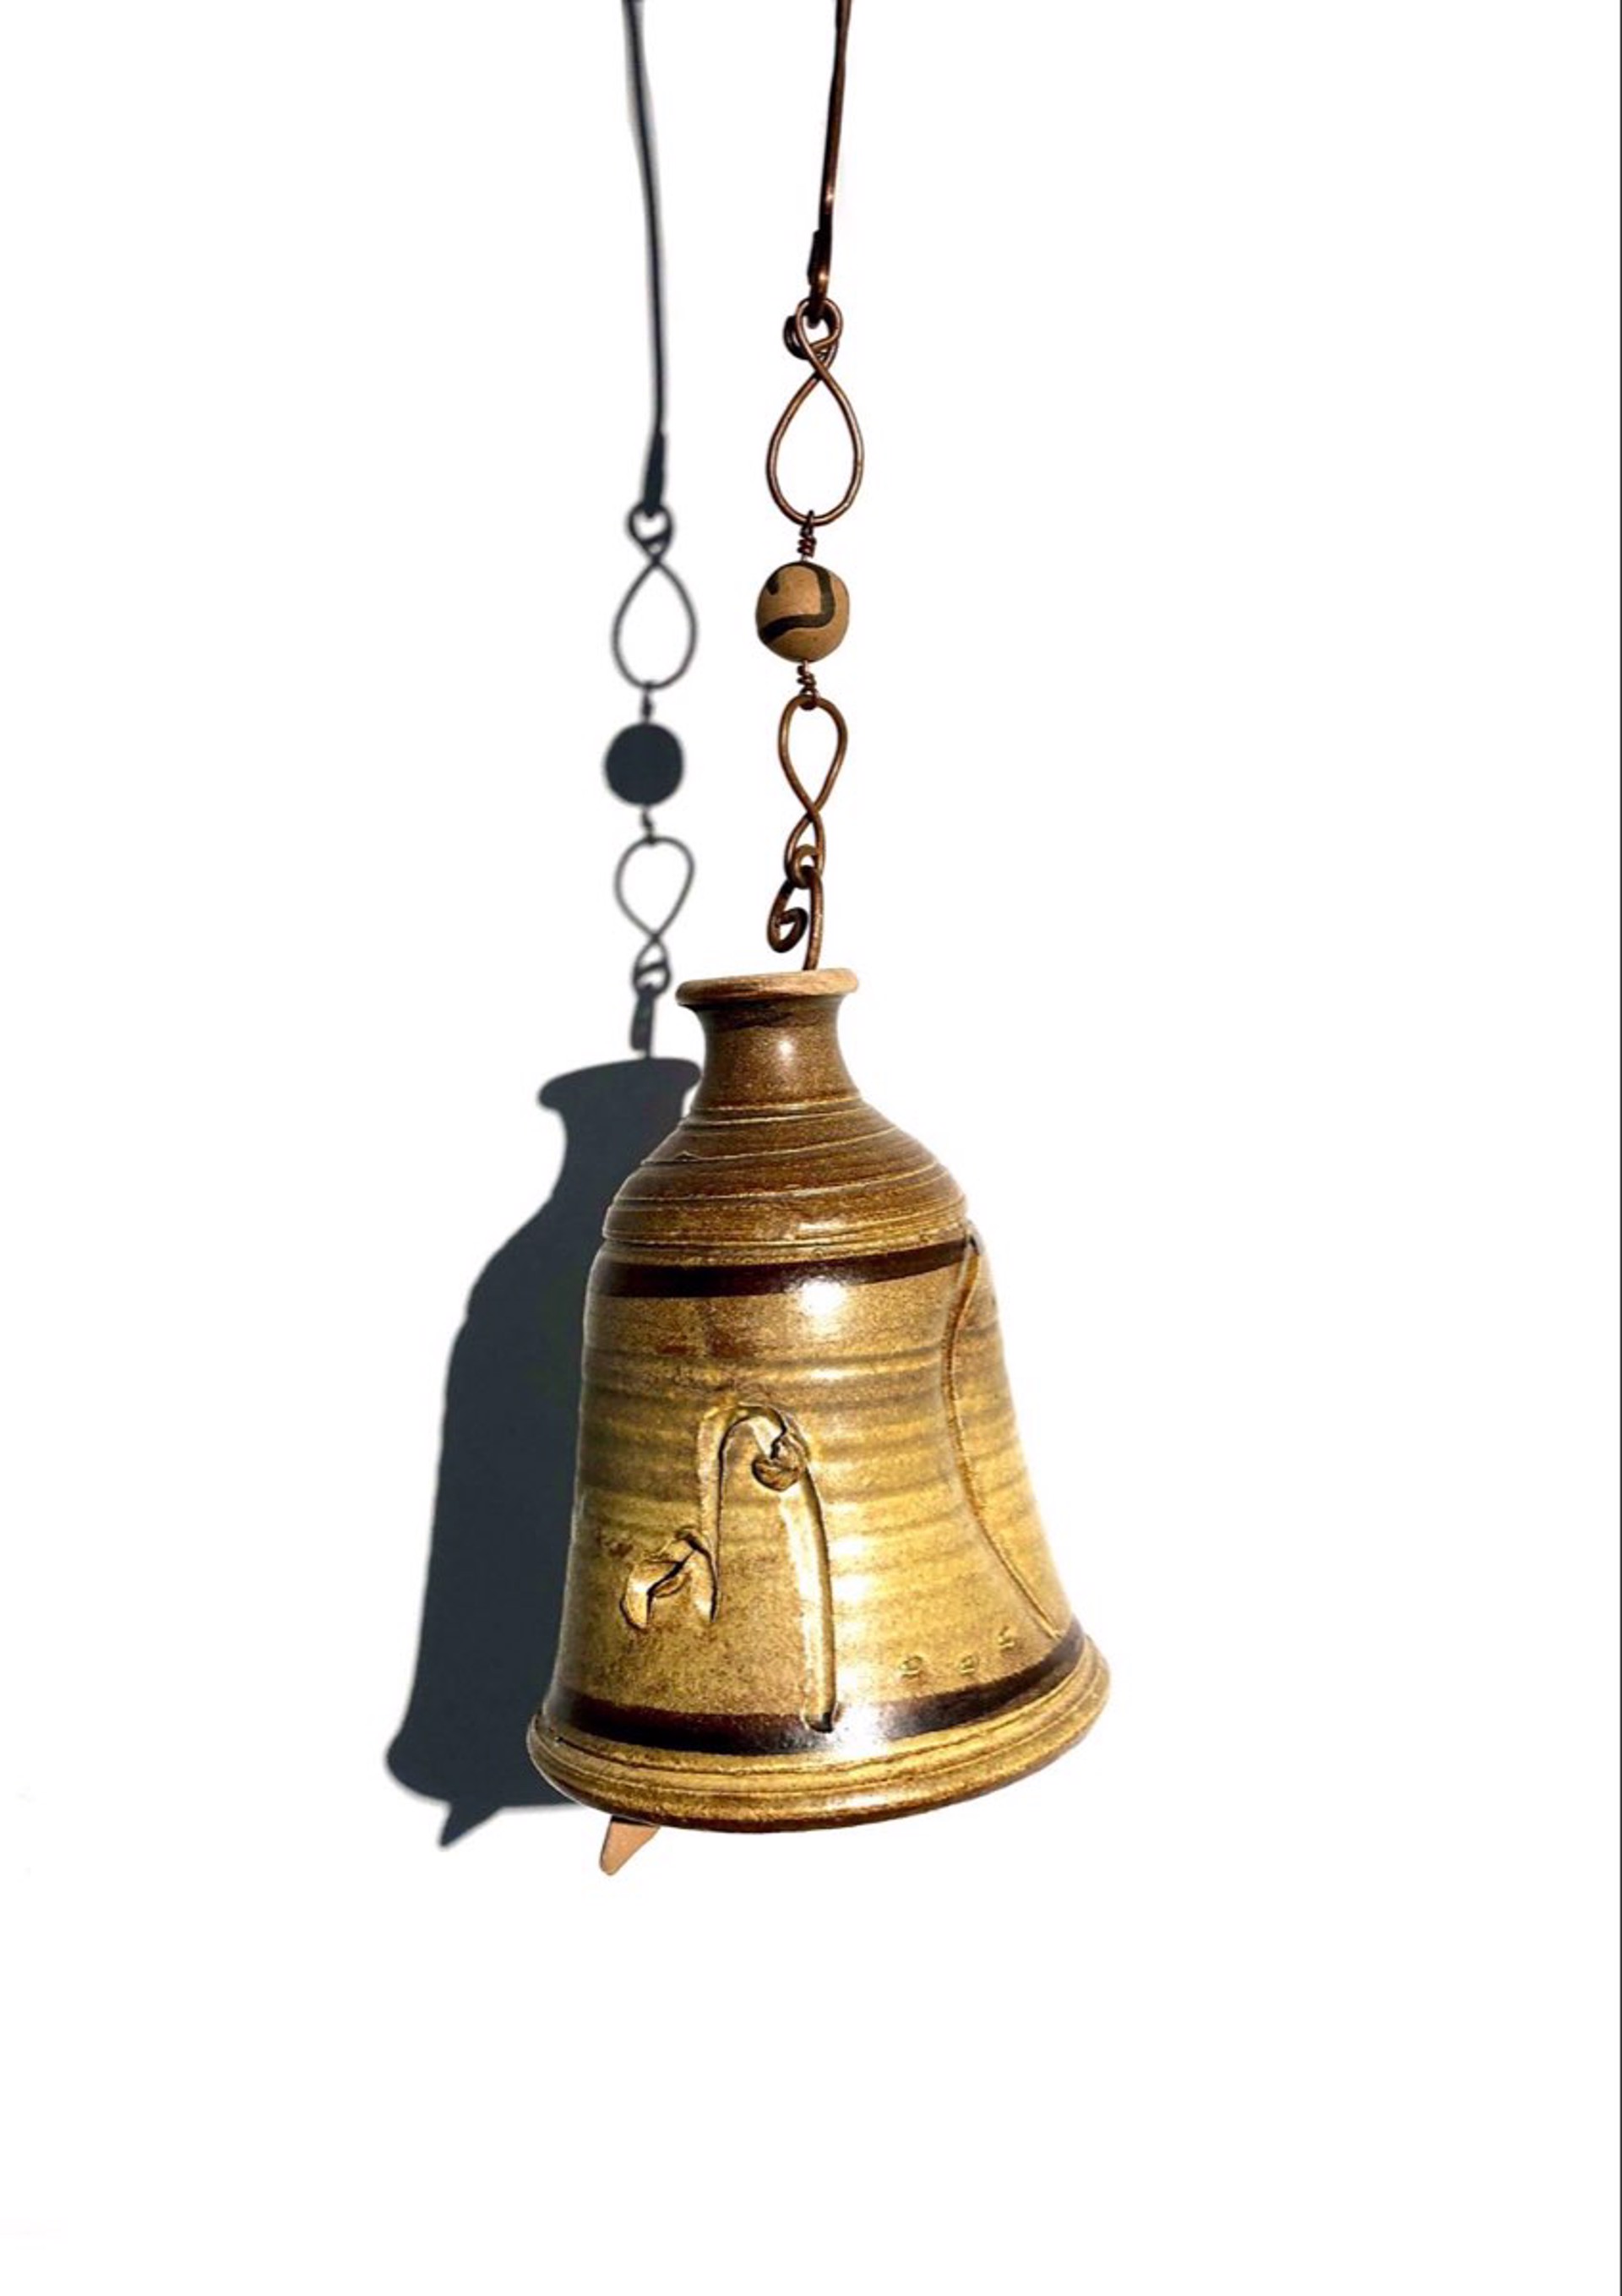 Tan Bell with Bead & Copper Hanger by Mary Lynn Portera